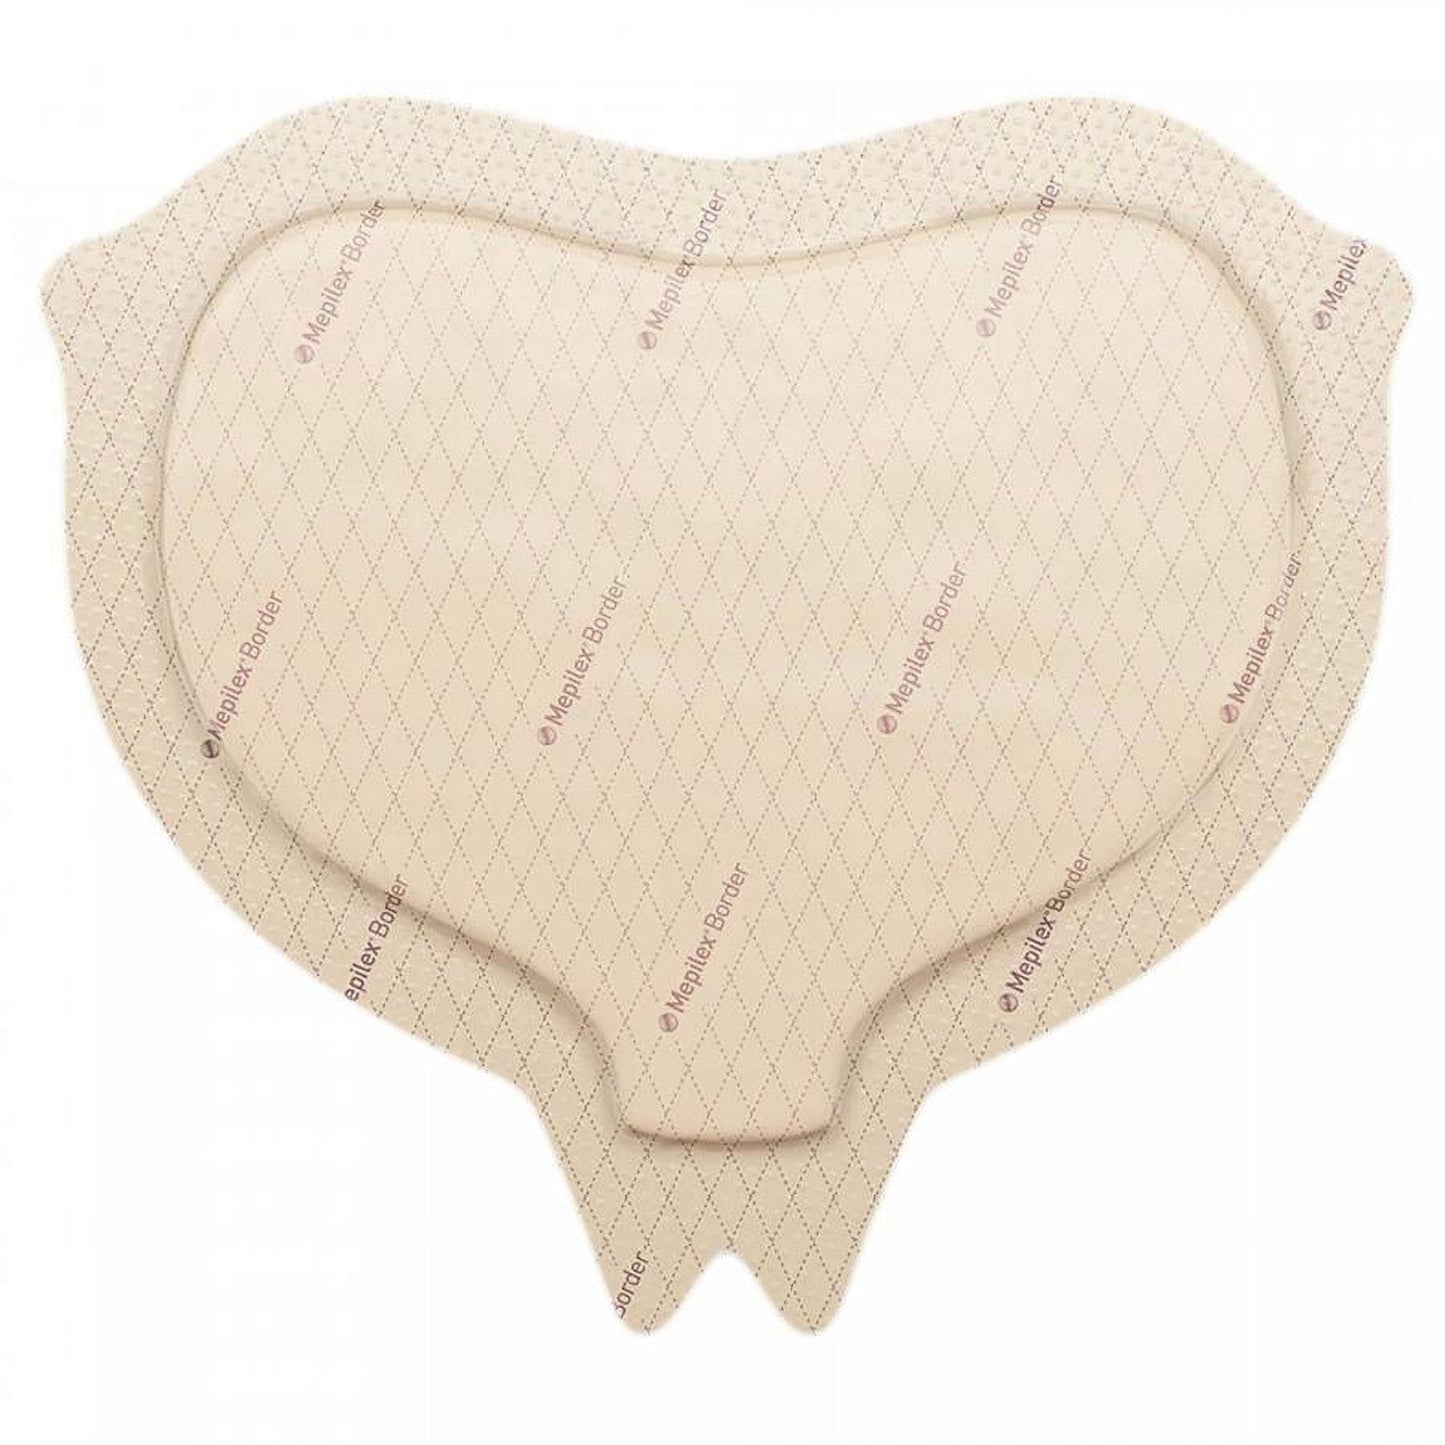 Mepilex Border Sacrum Self-Adherent Silicone Foam Dressing - 6.33 Inches x 7.9 Inches, 1 Count- KatyMedSolutions